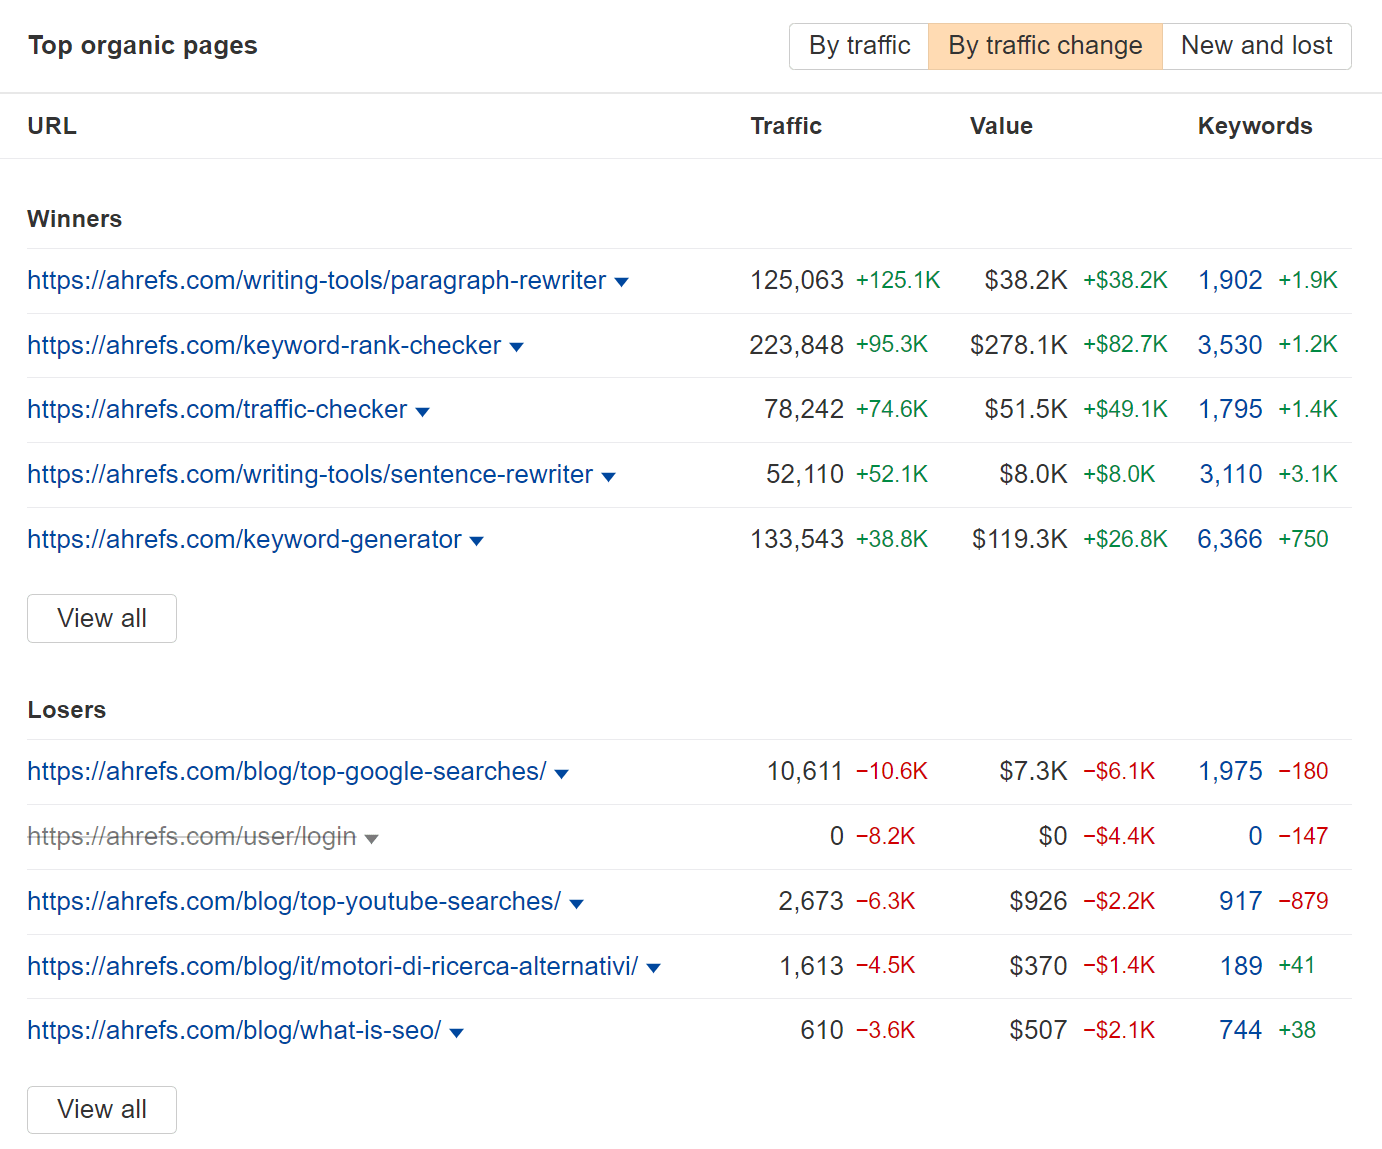 Winners and loser for your pages, via the Overview report in Ahrefs' Site Explorer